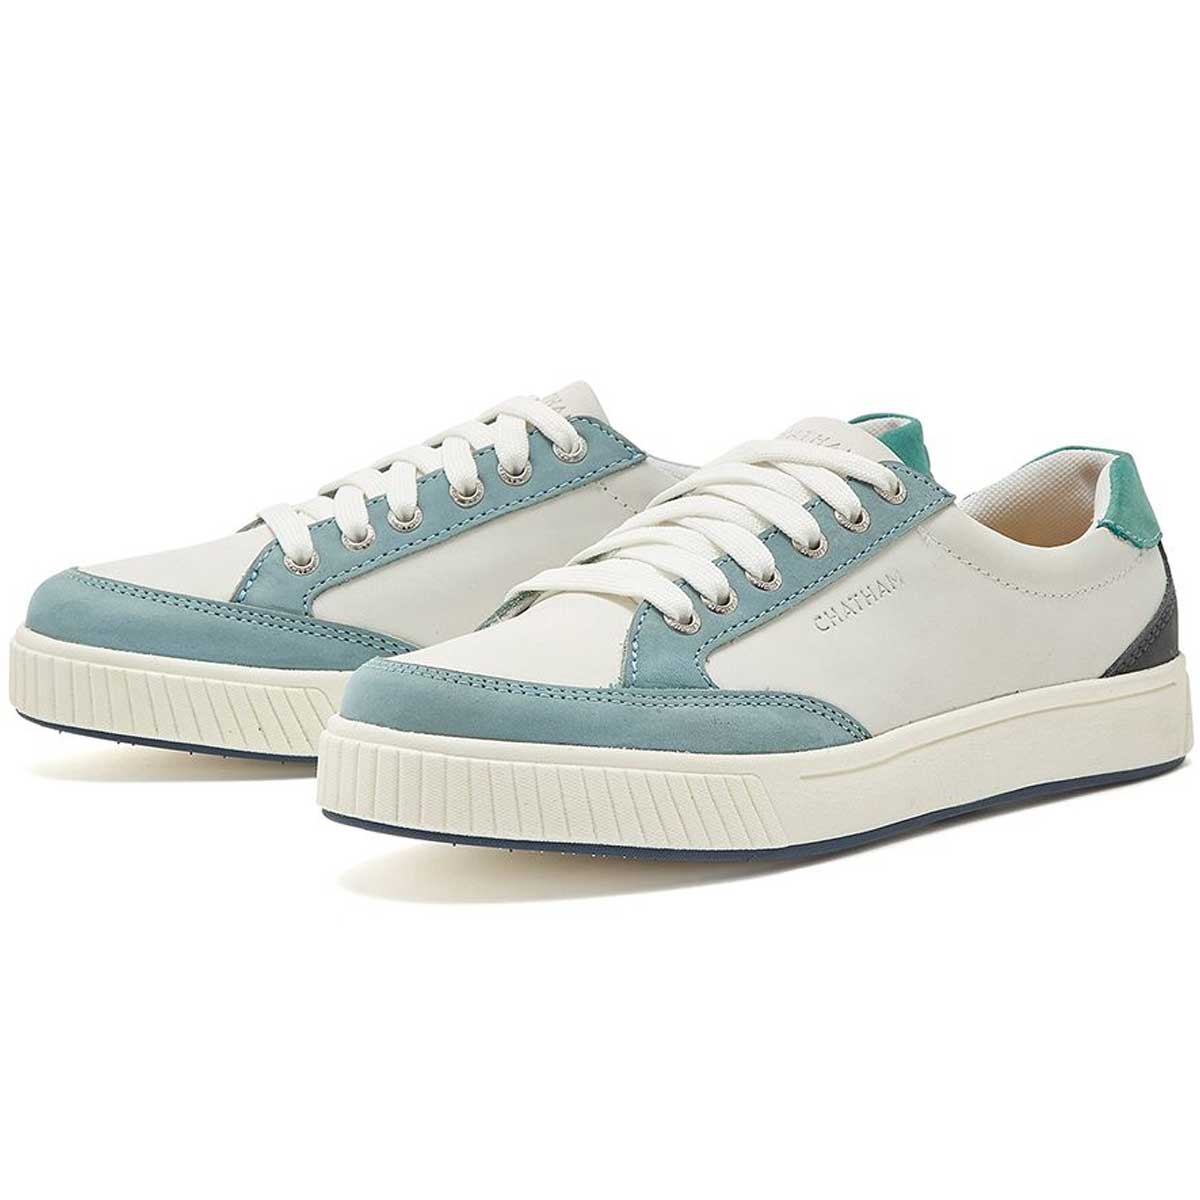 CHATHAM Fingle G2 Premium Leather Court-Style Trainers - Women's - White / Blue